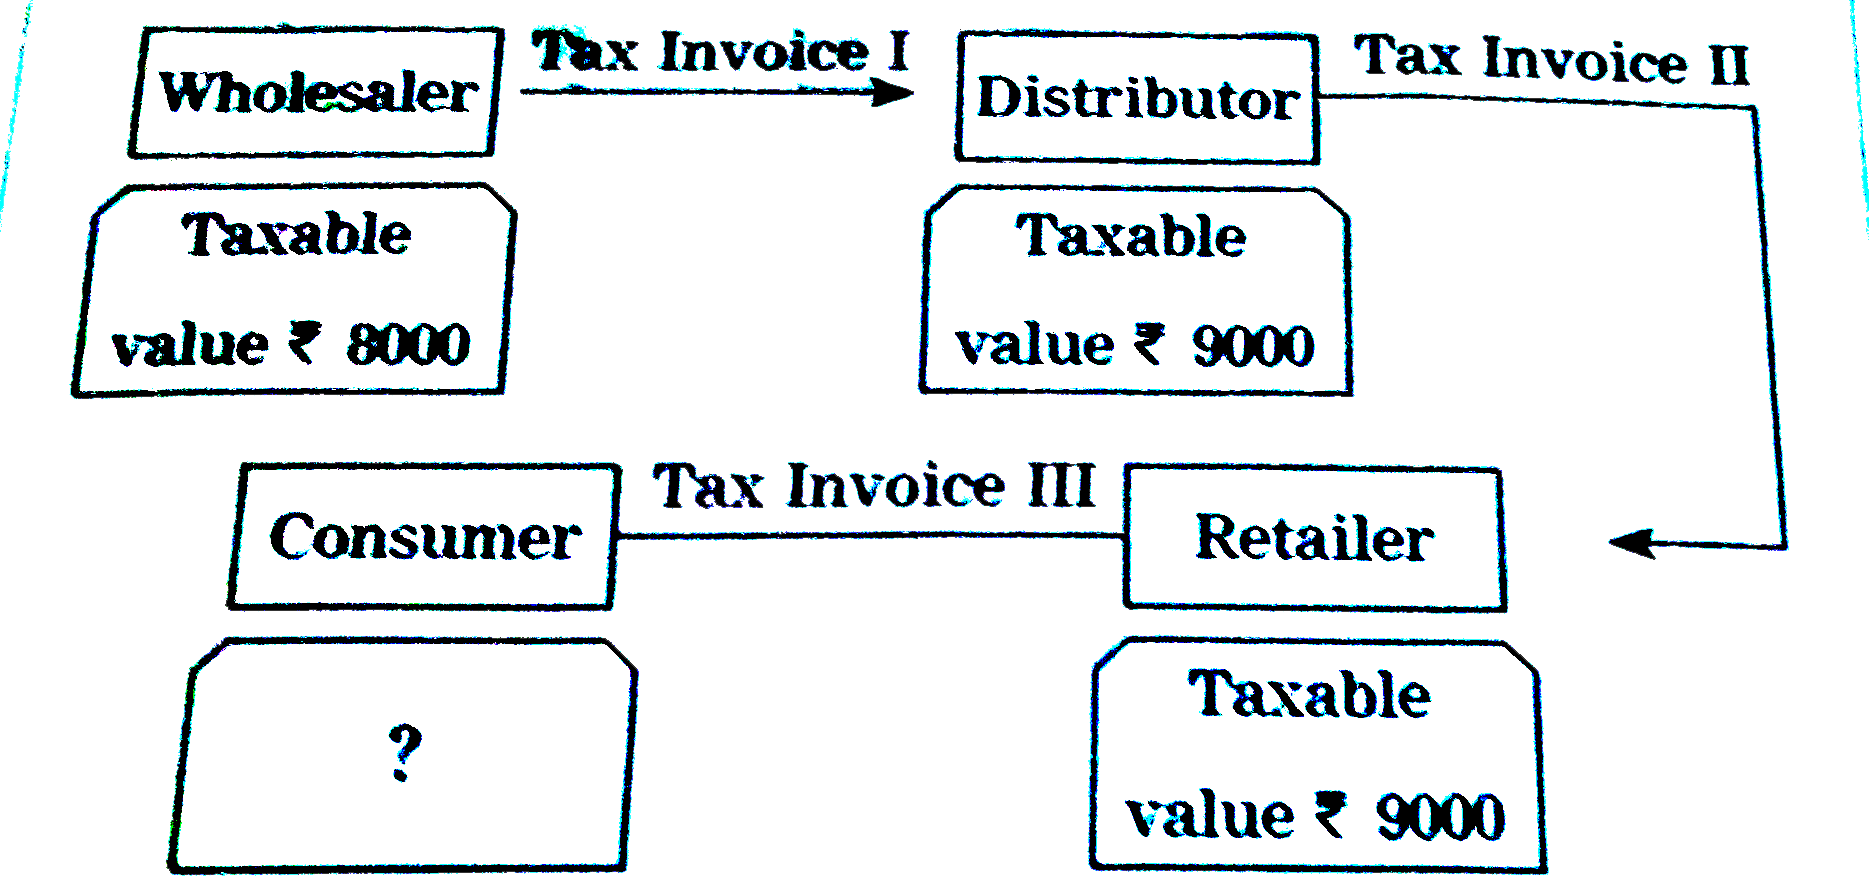 For the given  trading chain prepare the tax  invoice I,II,III GST at the rate of 18%        Prepare the statement  of GST  payable  under each head by the  wholesaler  distributor  and retailer  at the time  of filling  the return  to the government